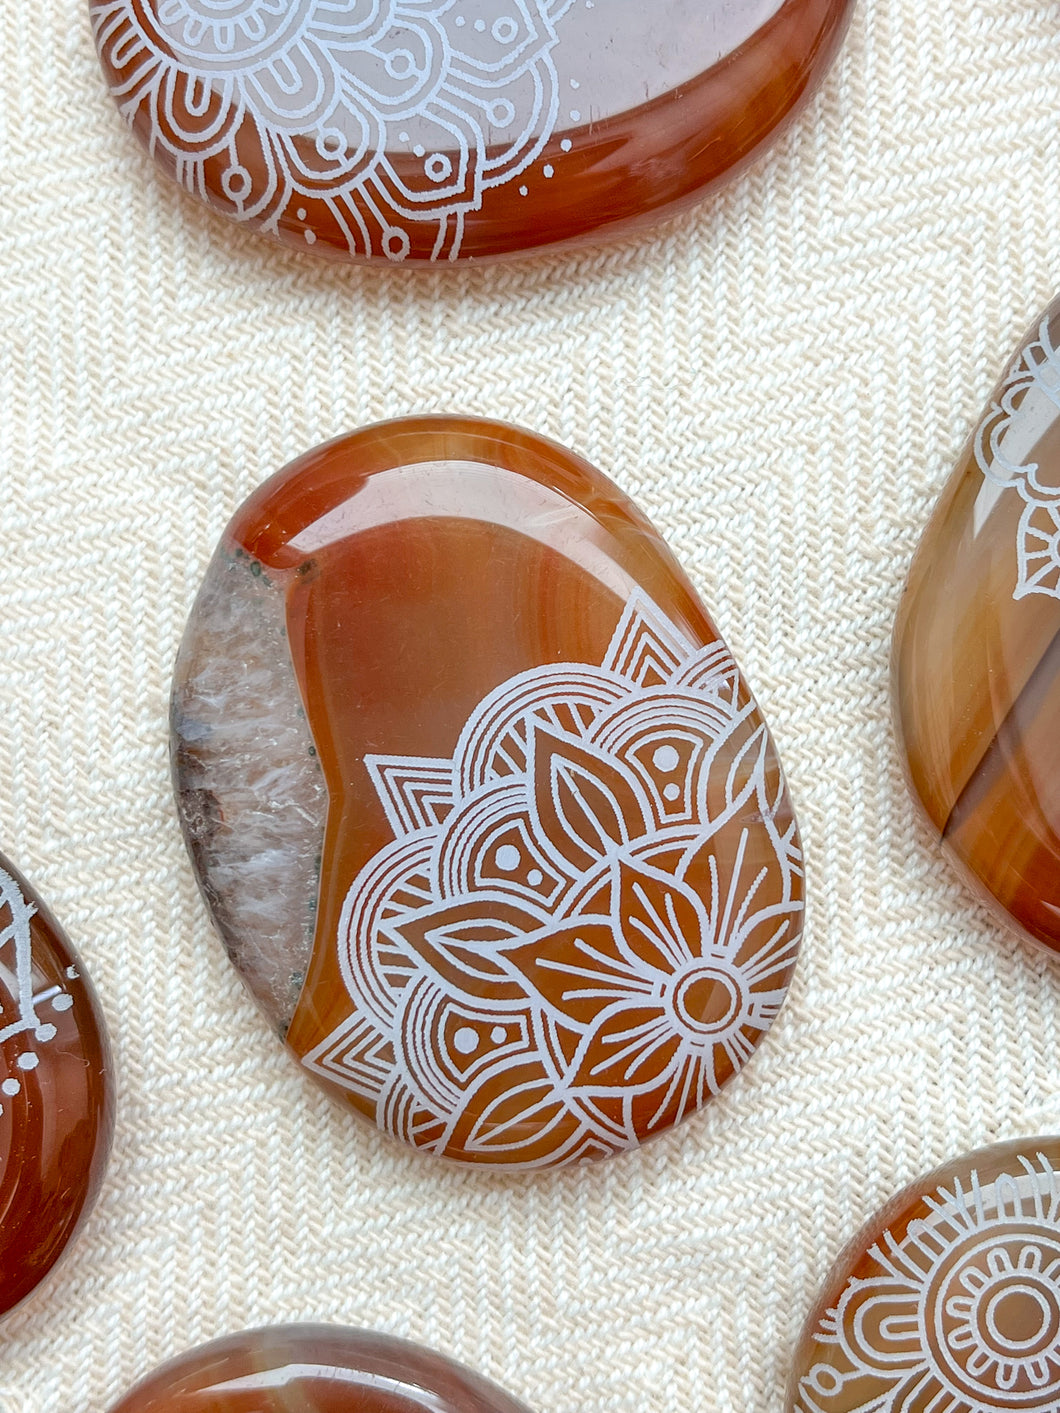 Carnelian Agate Pocket Stone Etched with Flower of Life or Various Mandalas